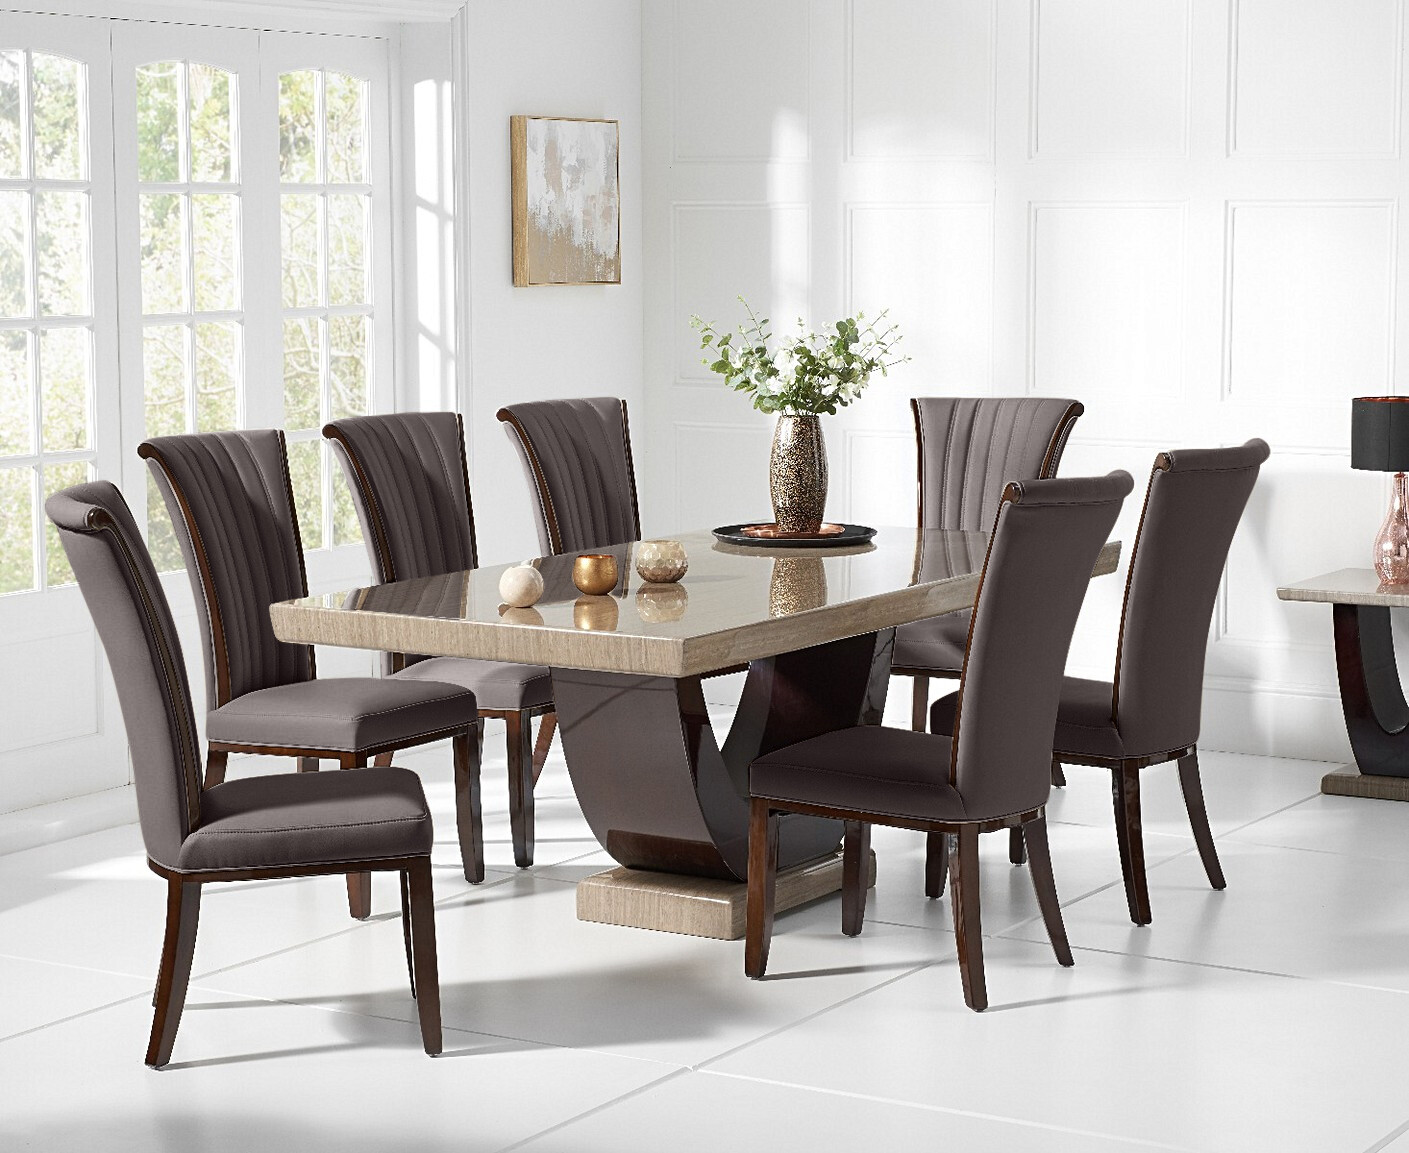 Photo 1 of Novara 200cm brown pedestal marble dining table with 6 brown alpine chairs